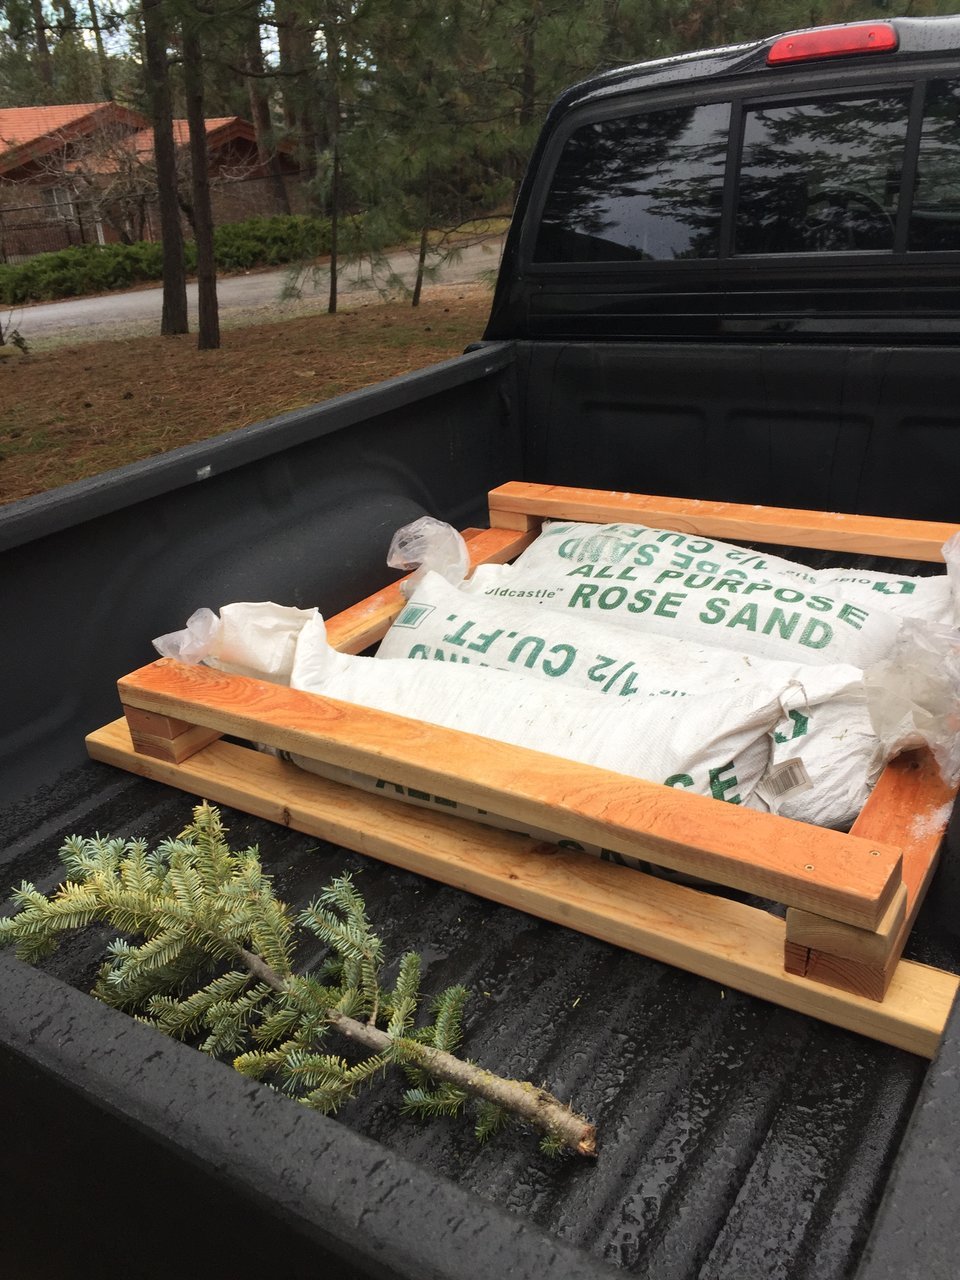 Sandbags In Truck Bed For Smooth Ride